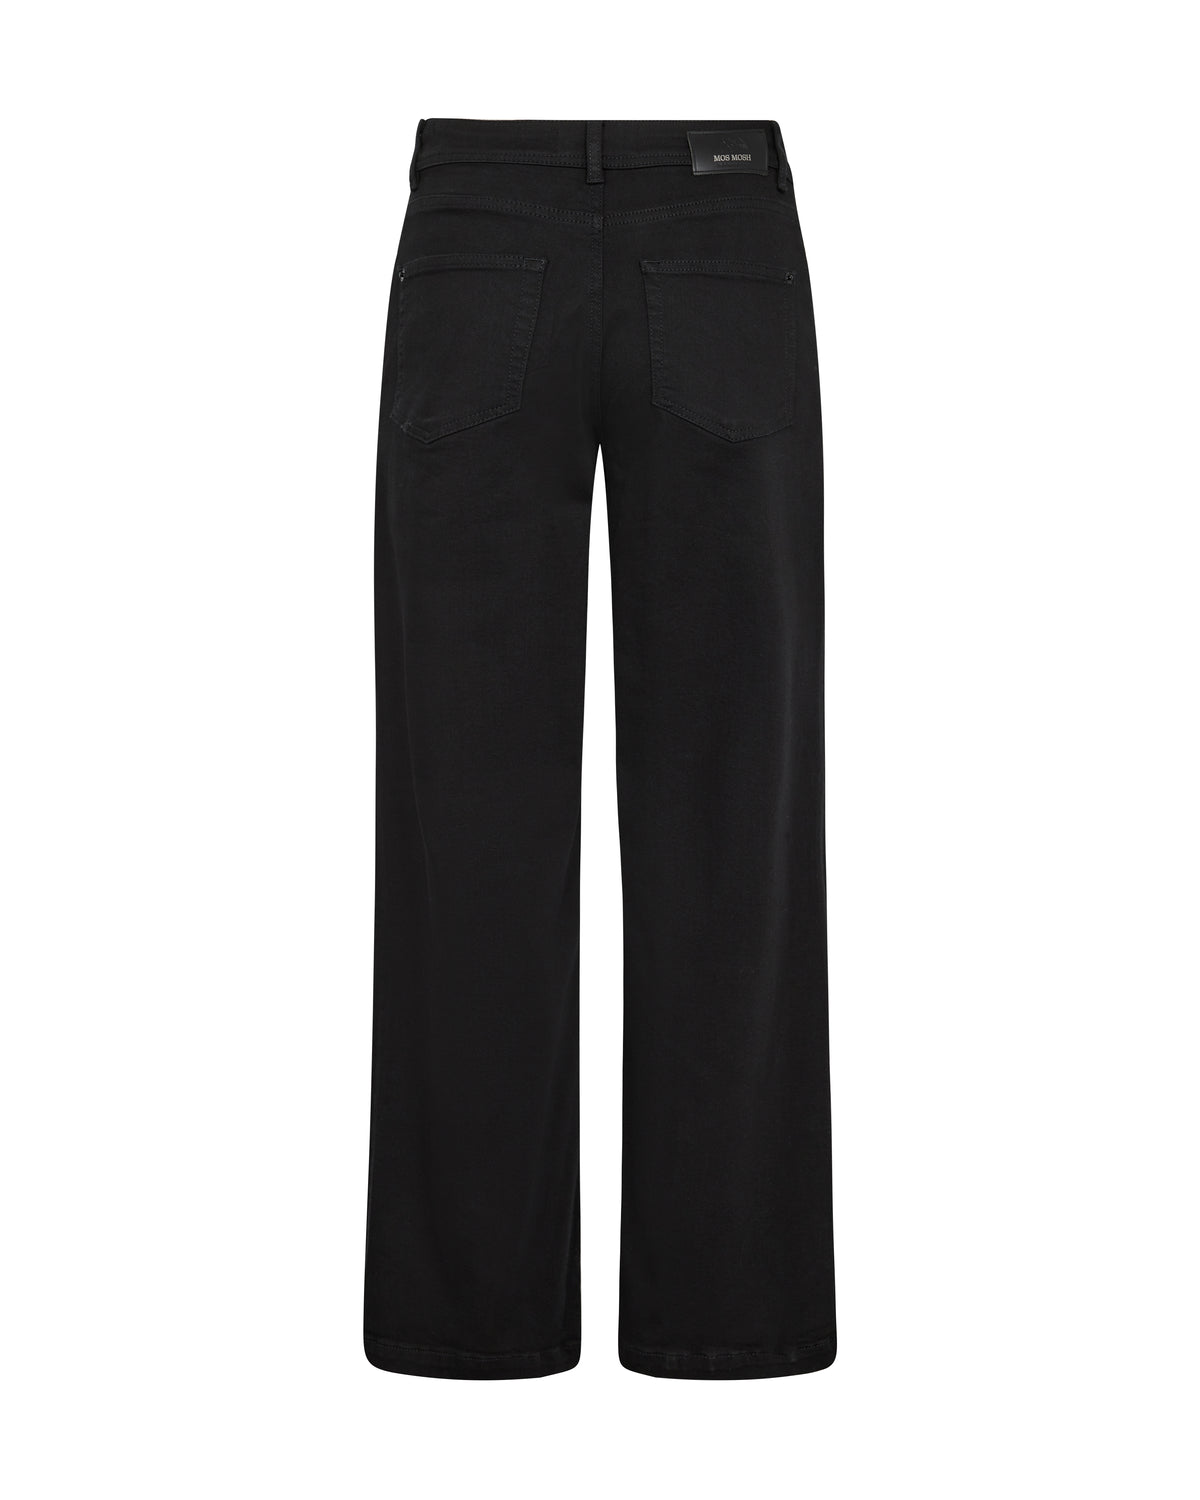 straight wide leg high rise black jeans rear view 